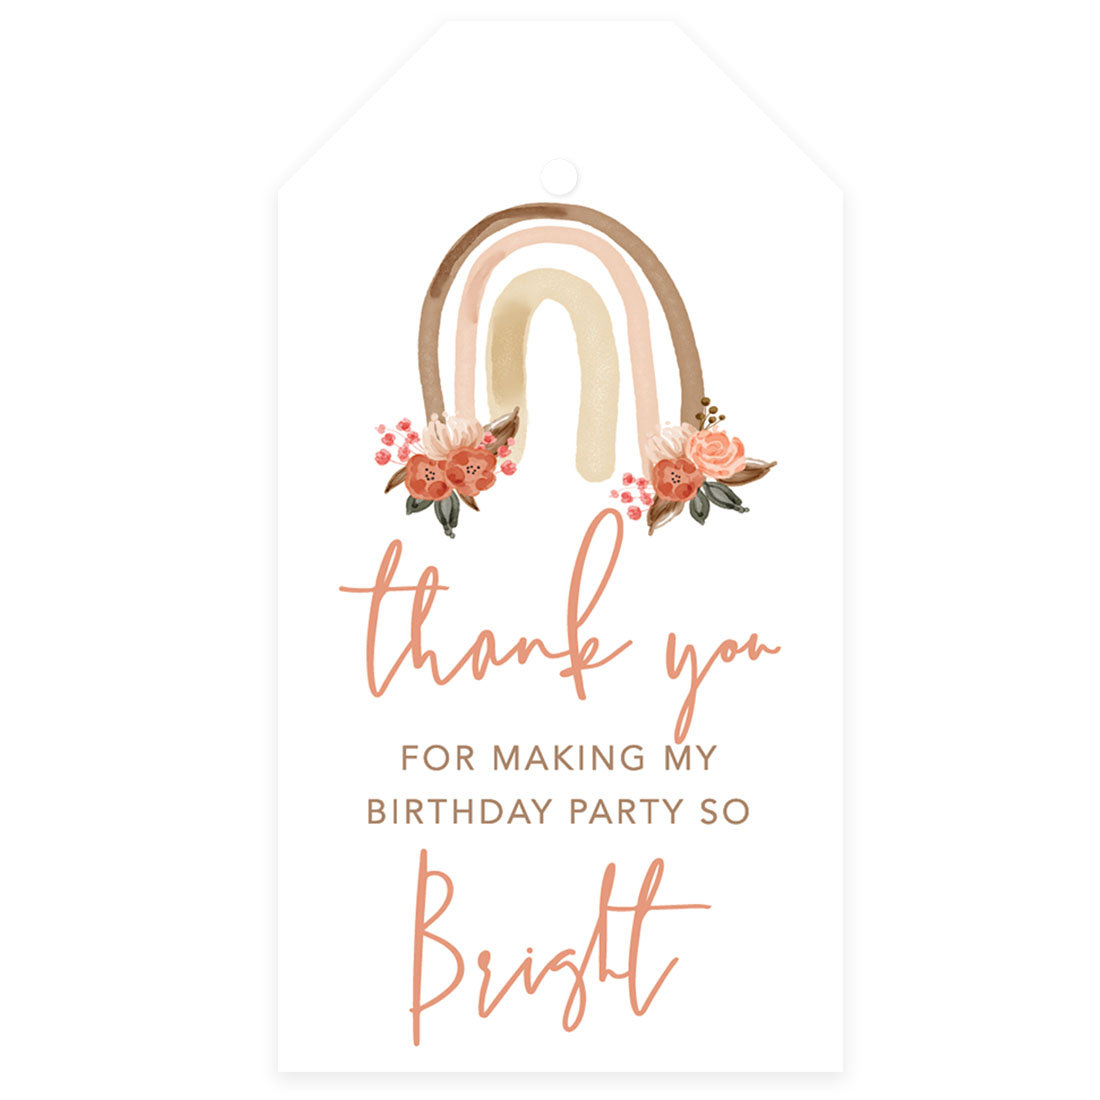 Koyal Wholesale Kids Party Favor Classic Thank You Tags with String, Butterfly Birthday Gift Tags, for Party Favors Bags, White